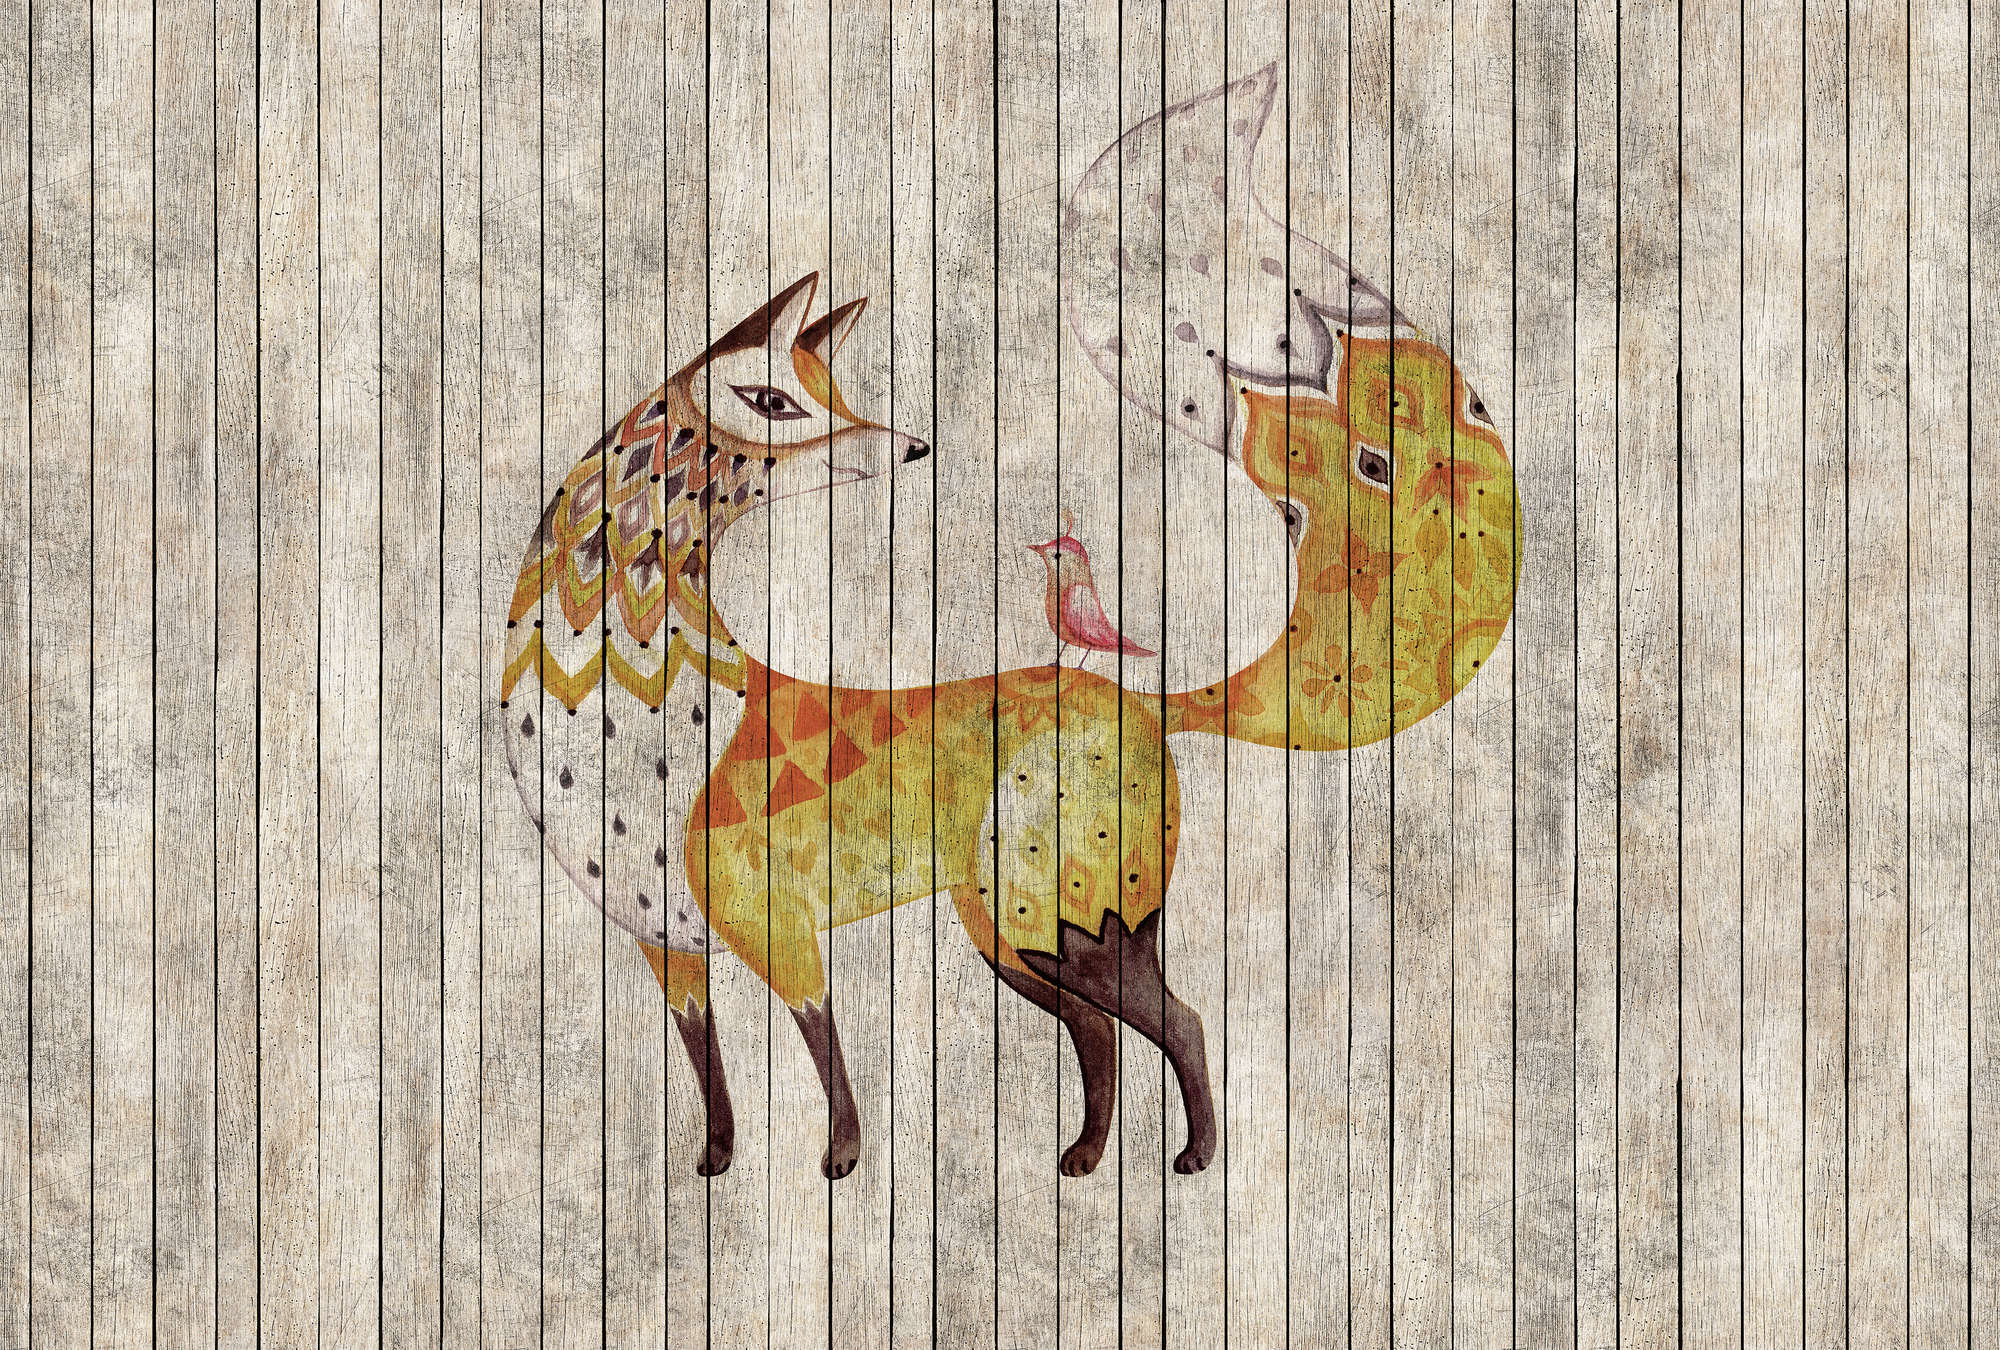             Fairy tale 2 - Fox and Bird on Wood Optic Wallpaper - Beige, Brown | Textured non-woven
        